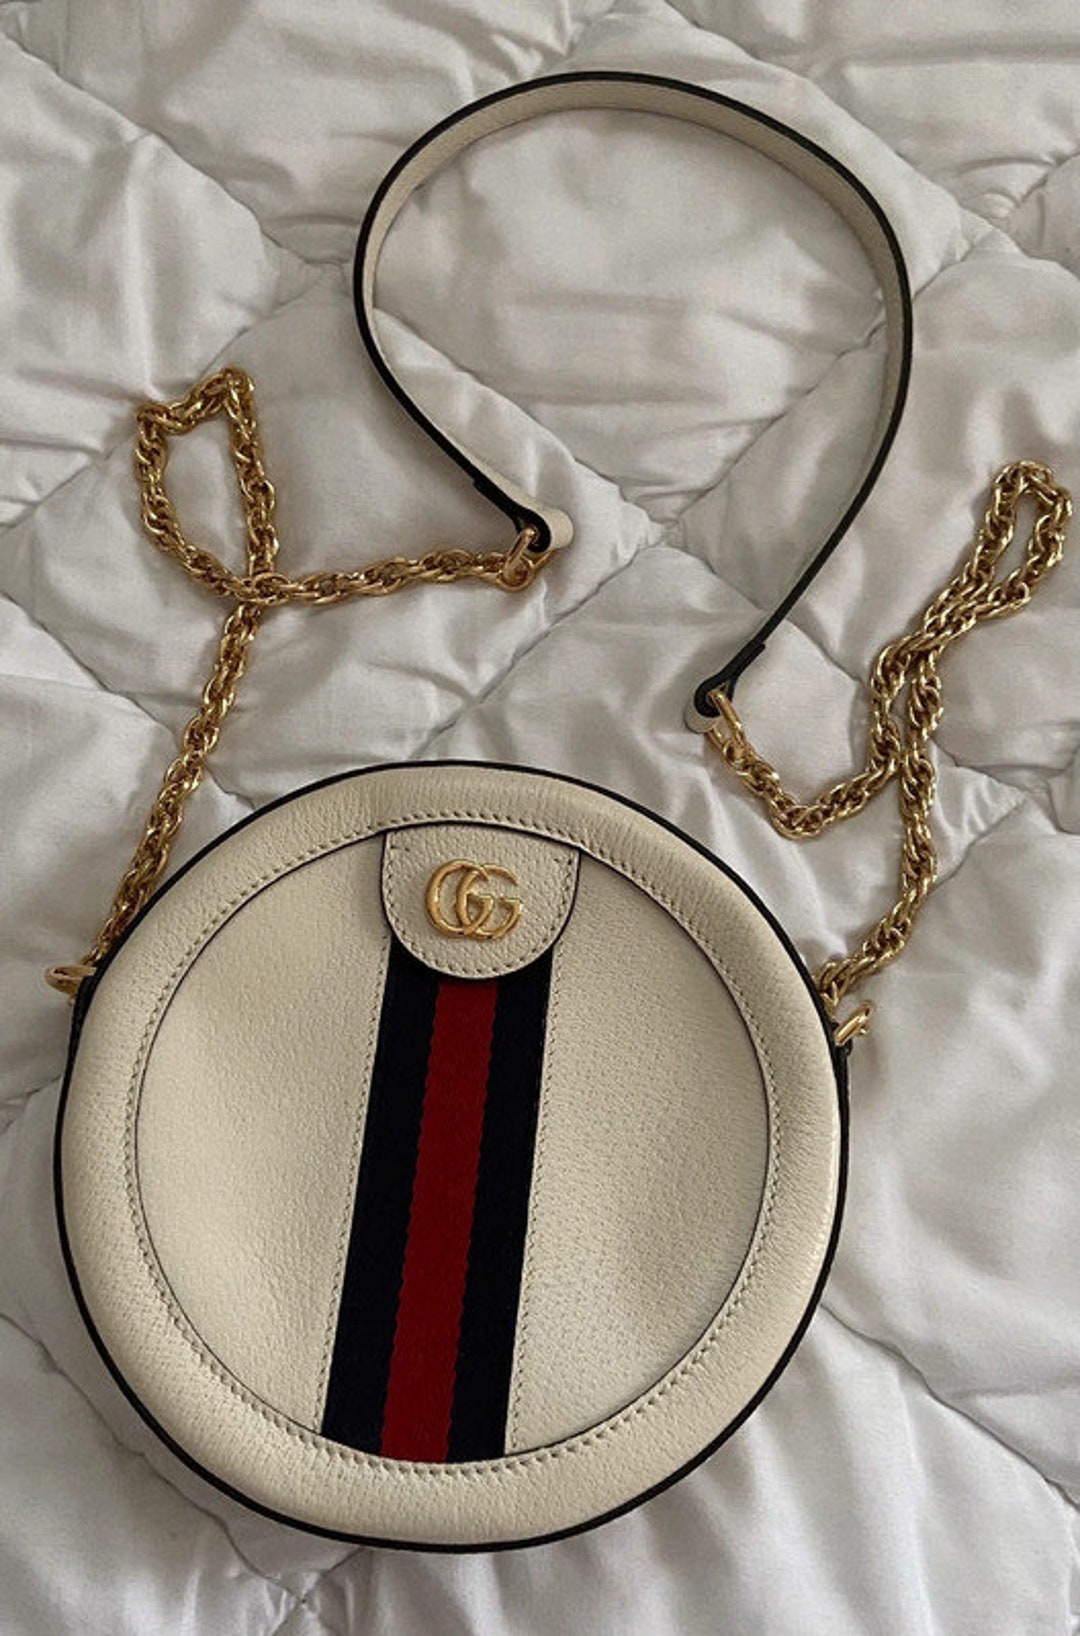 GUCCI Ophidia Round Bag in Ivory Leather Shoulder Strap - Etsy Australia